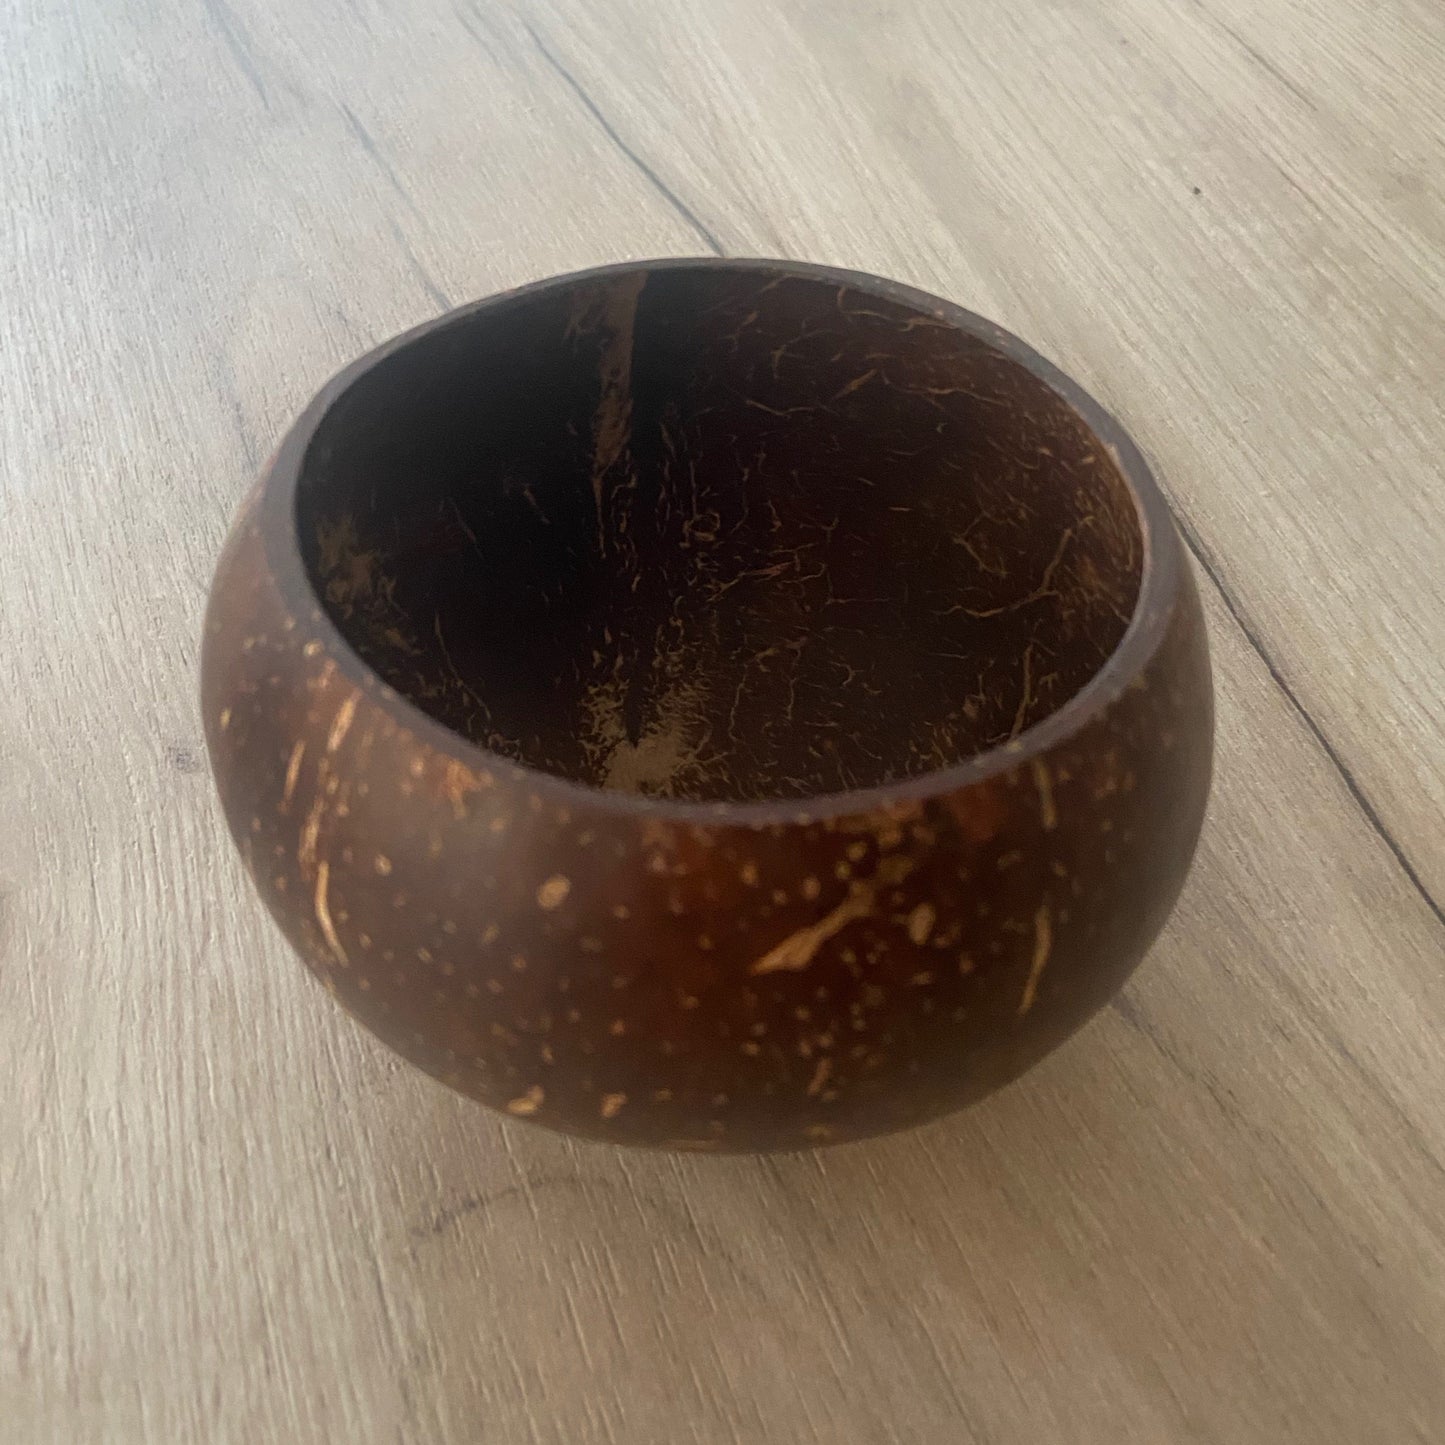 Small coconut bowl - Polished on both sides